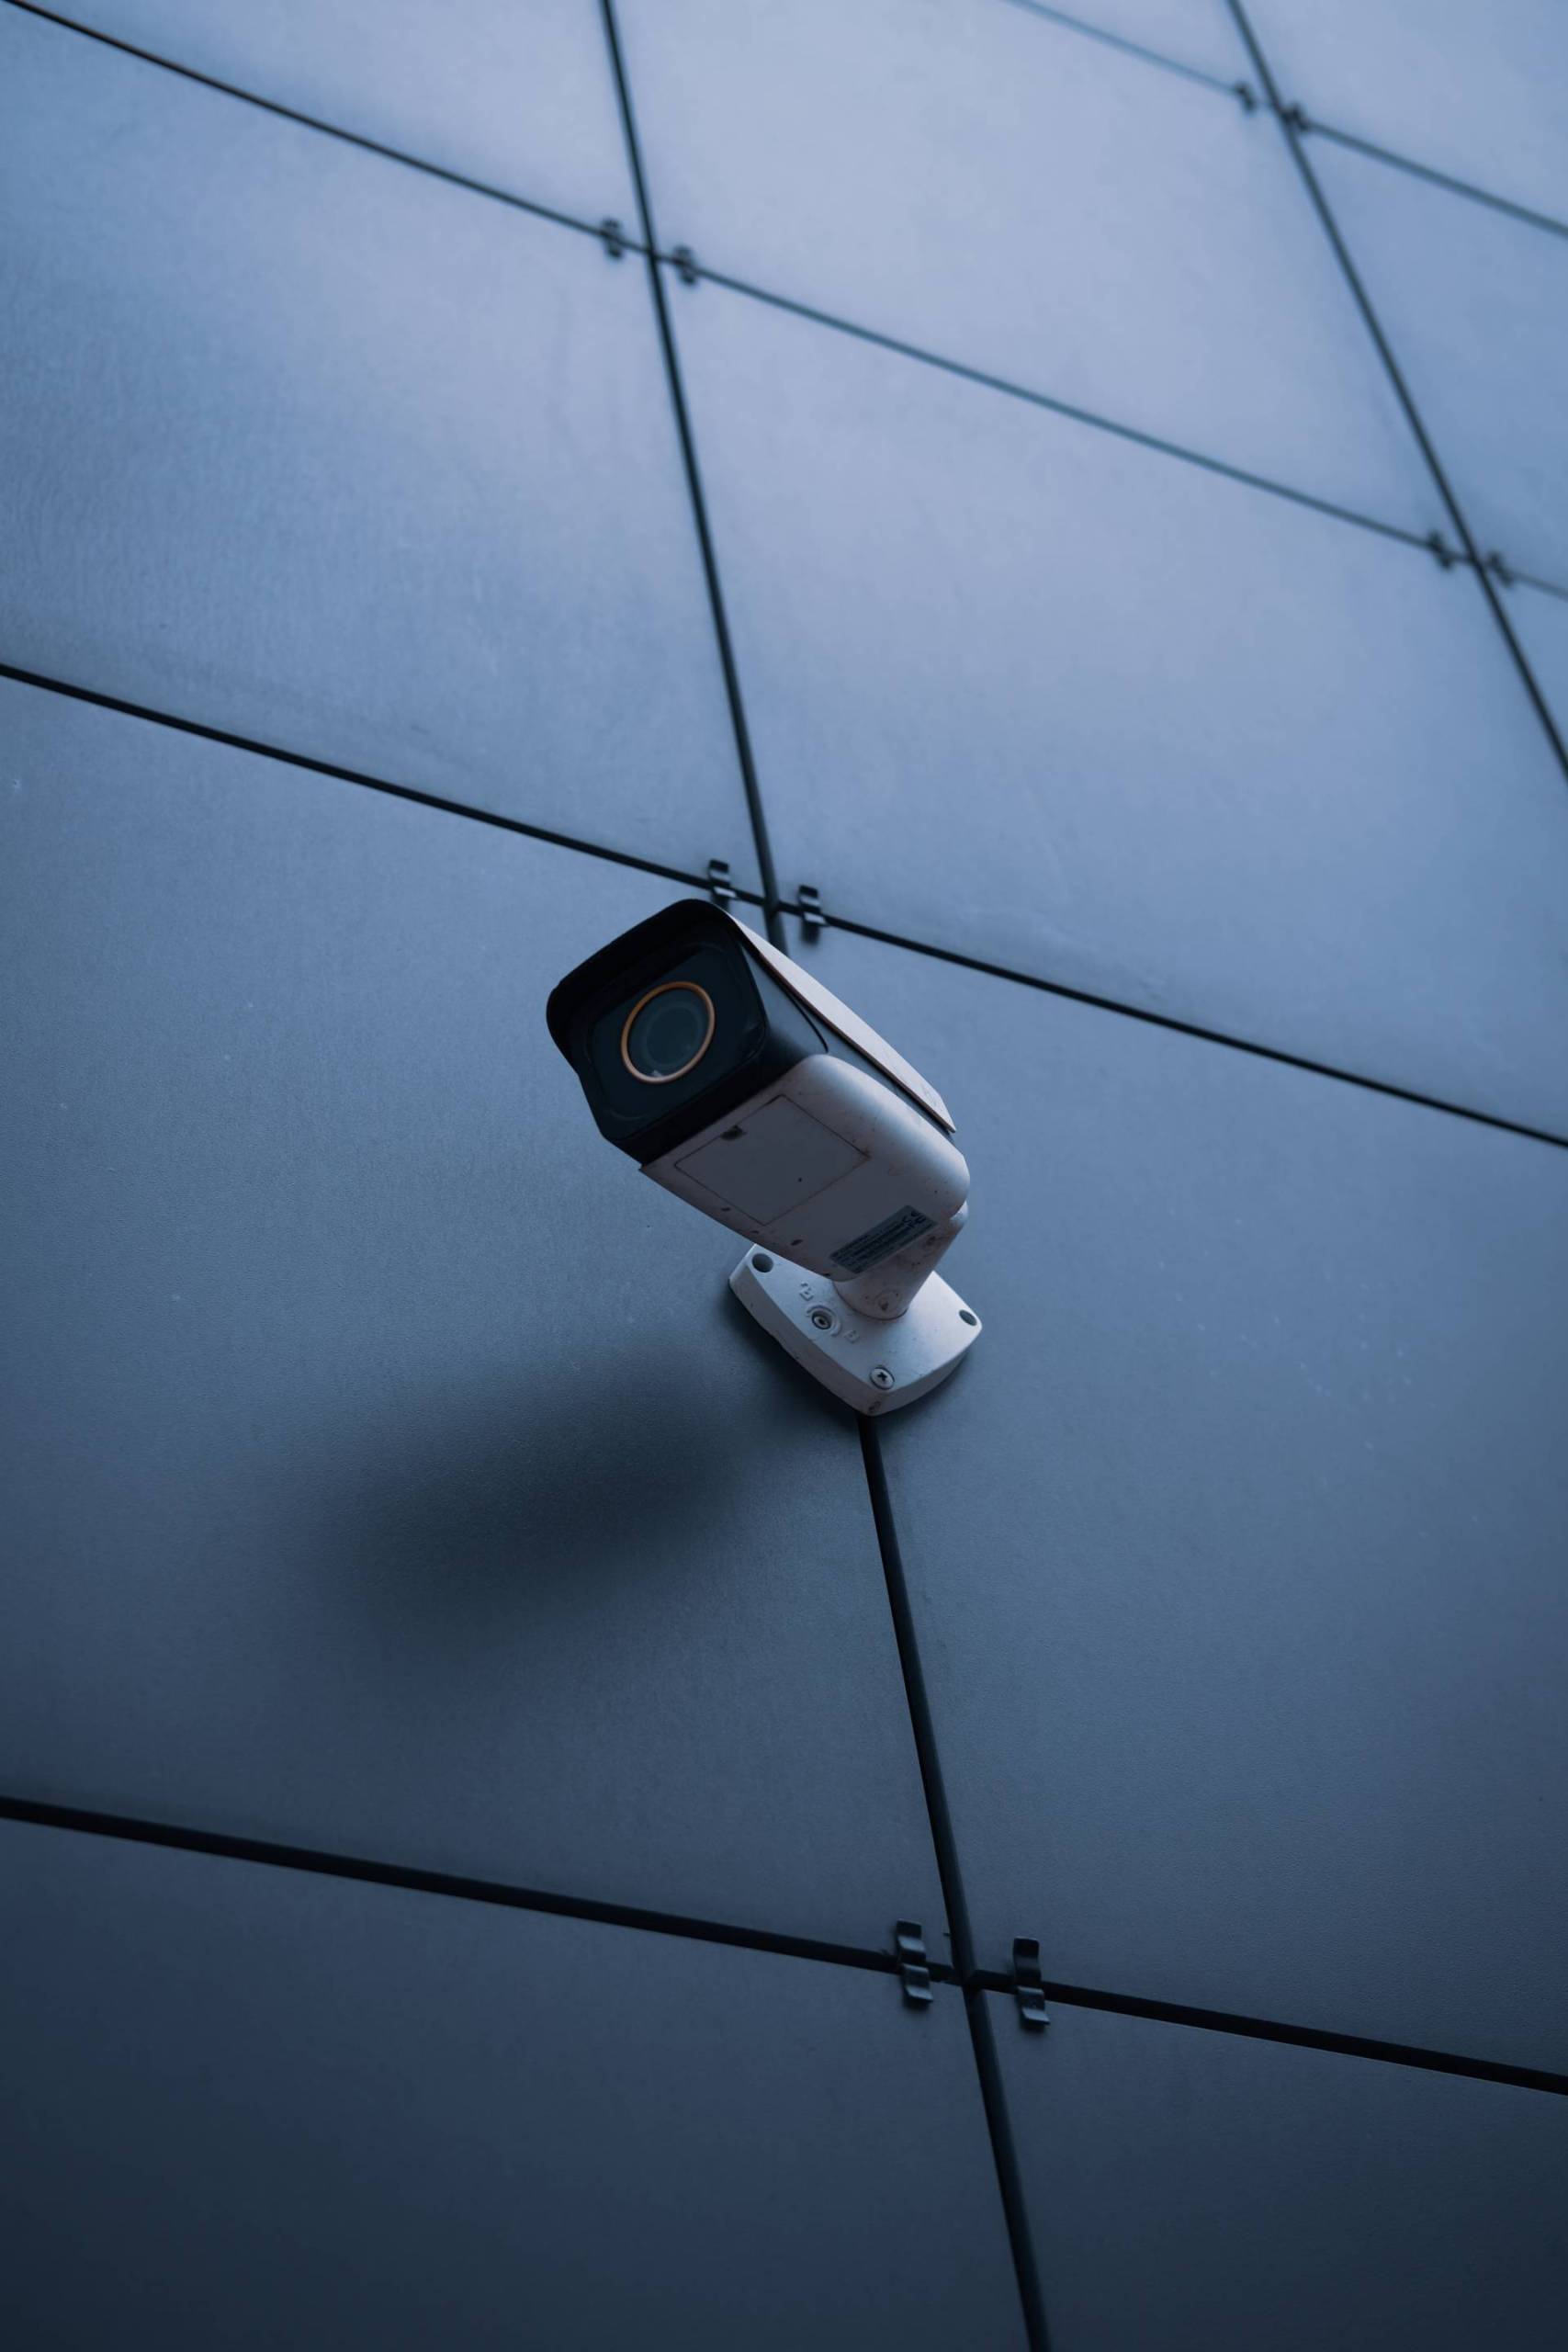 Hackers Exploit Flaw in Surveillance Cameras: A Serious Security Concern - readwrite.com